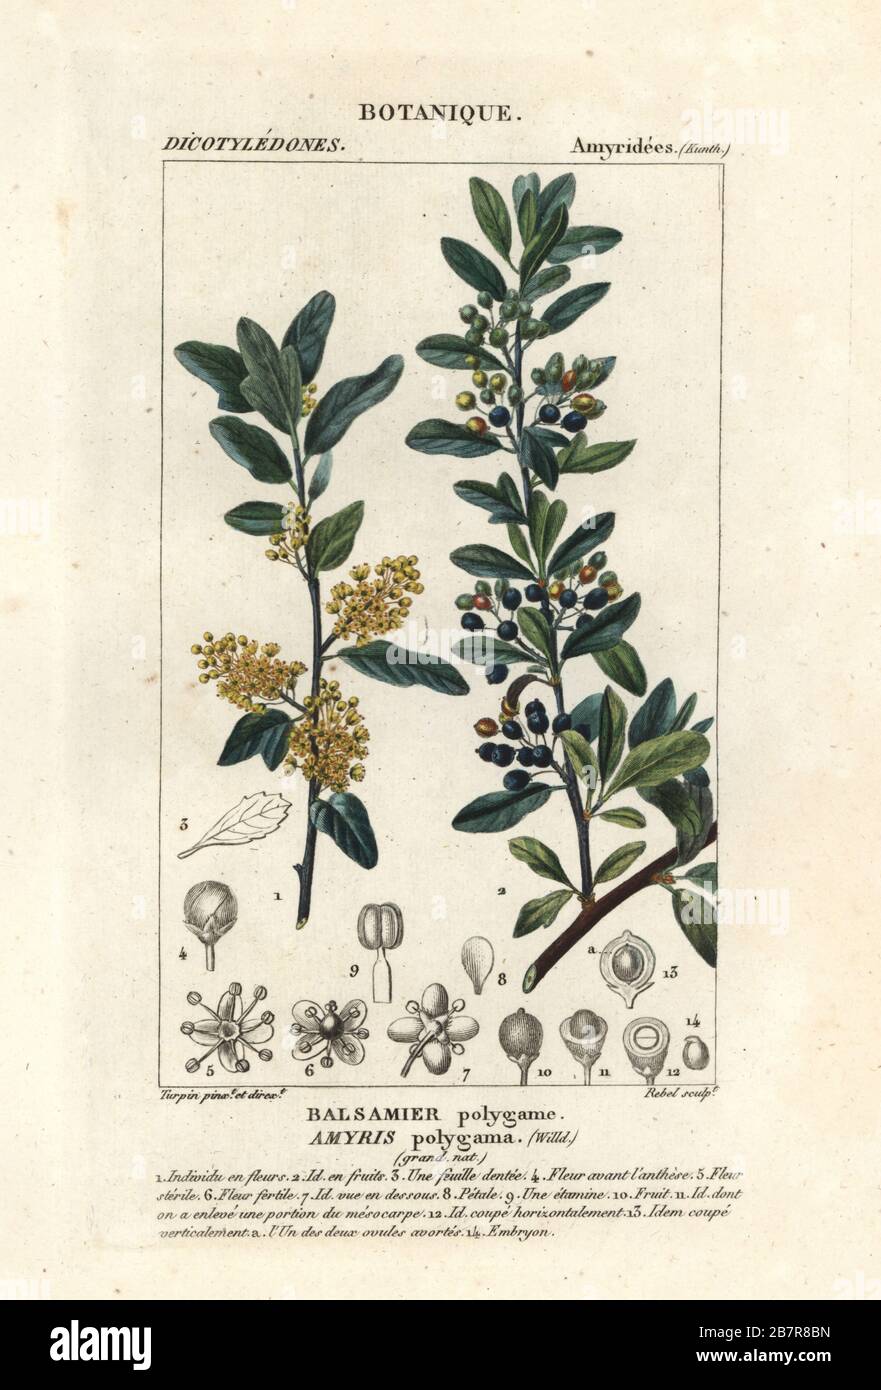 Hardee peppertree or Chilean pepper tree, Schinus polygama. (Amyris polygama, Balsamer polygame.) Handcoloured copperplate stipple engraving from Antoine Laurent de Jussieu's Dizionario delle Scienze Naturali, Dictionary of Natural Science, Florence, Italy, 1837. Illustration engraved by Rebel, drawn and directed by Pierre Jean-Francois Turpin, and published by Batelli e Figli. Turpin (1775-1840) is considered one of the greatest French botanicalillustrators of the 19th century. Stock Photo